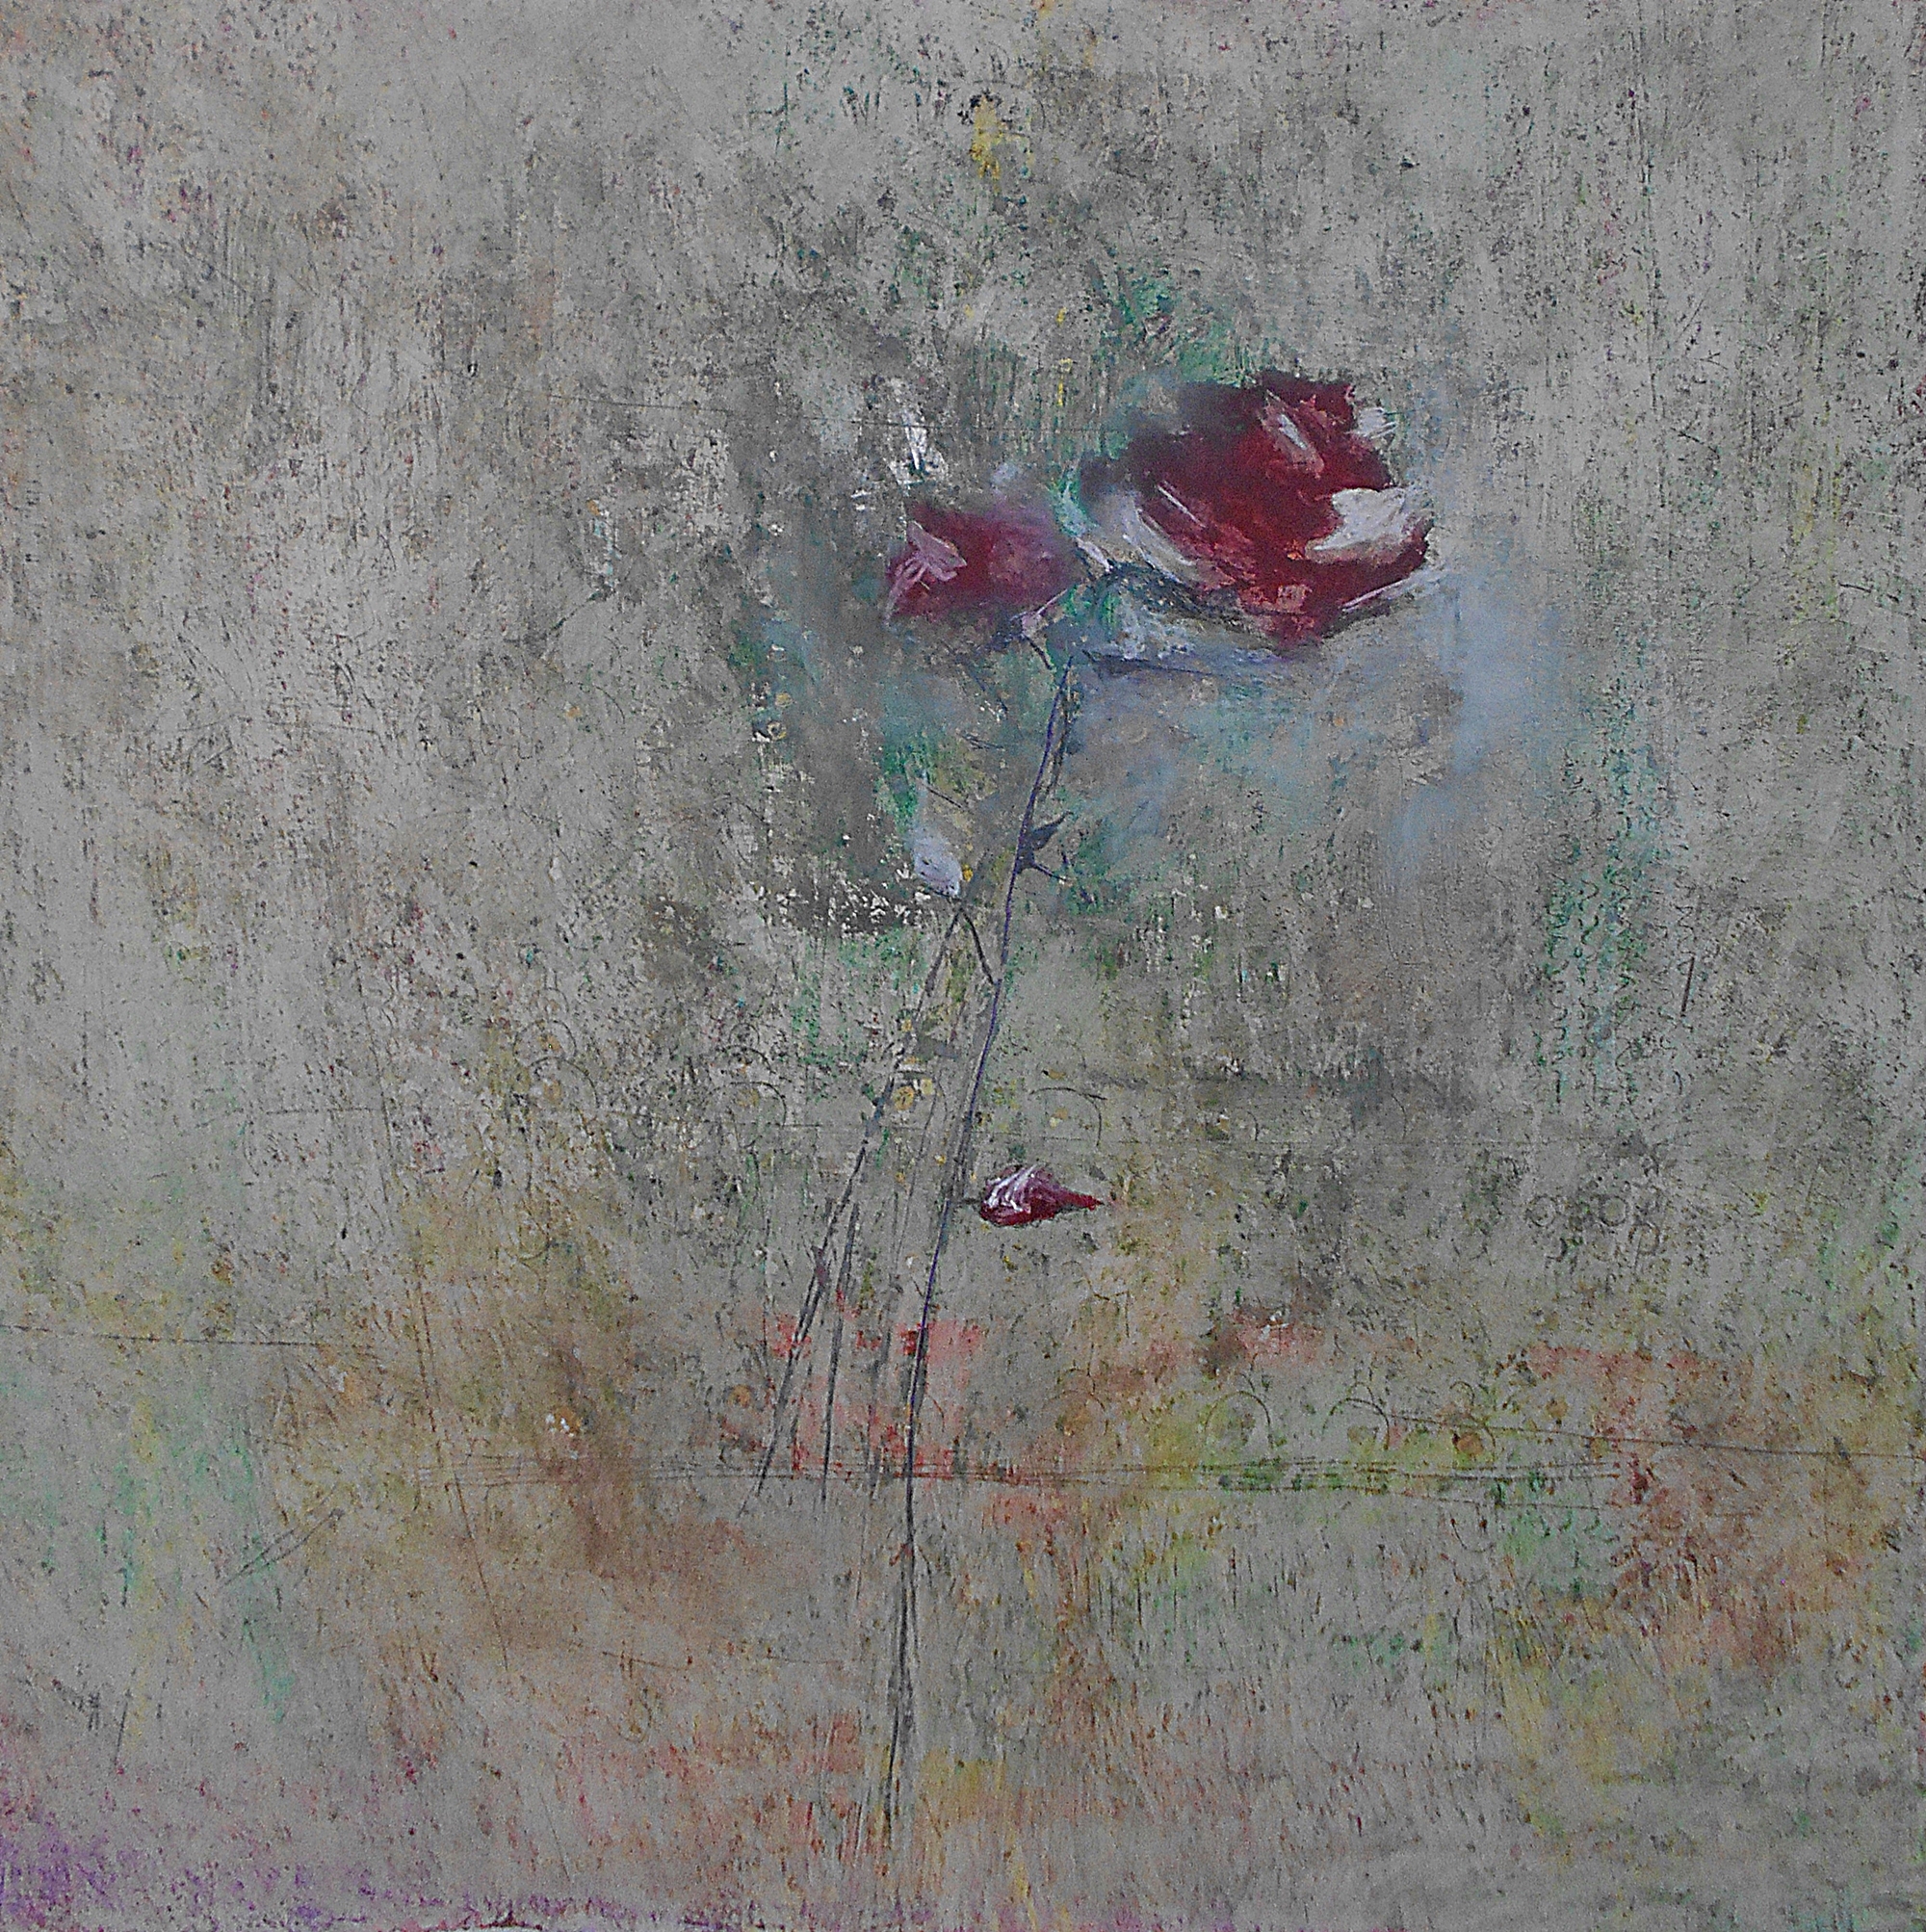 18.The rose, 70x70cm, oil pastel on paper, 2018